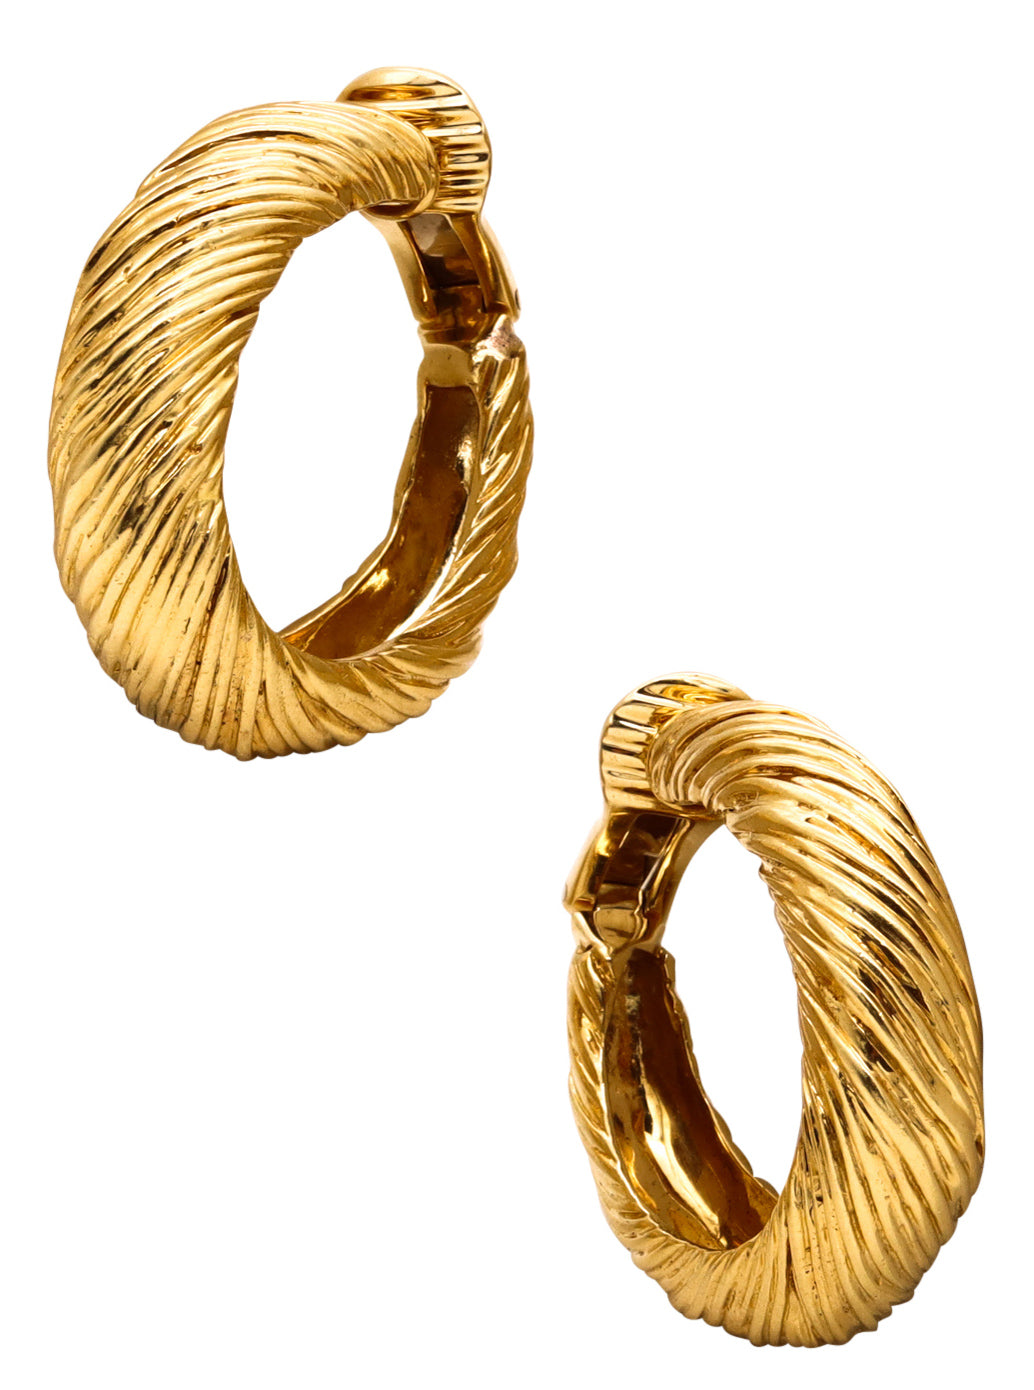 Kutchinsky 1972 British London Textured Large Hoop Earrings In Solid 18Kt Yellow Gold